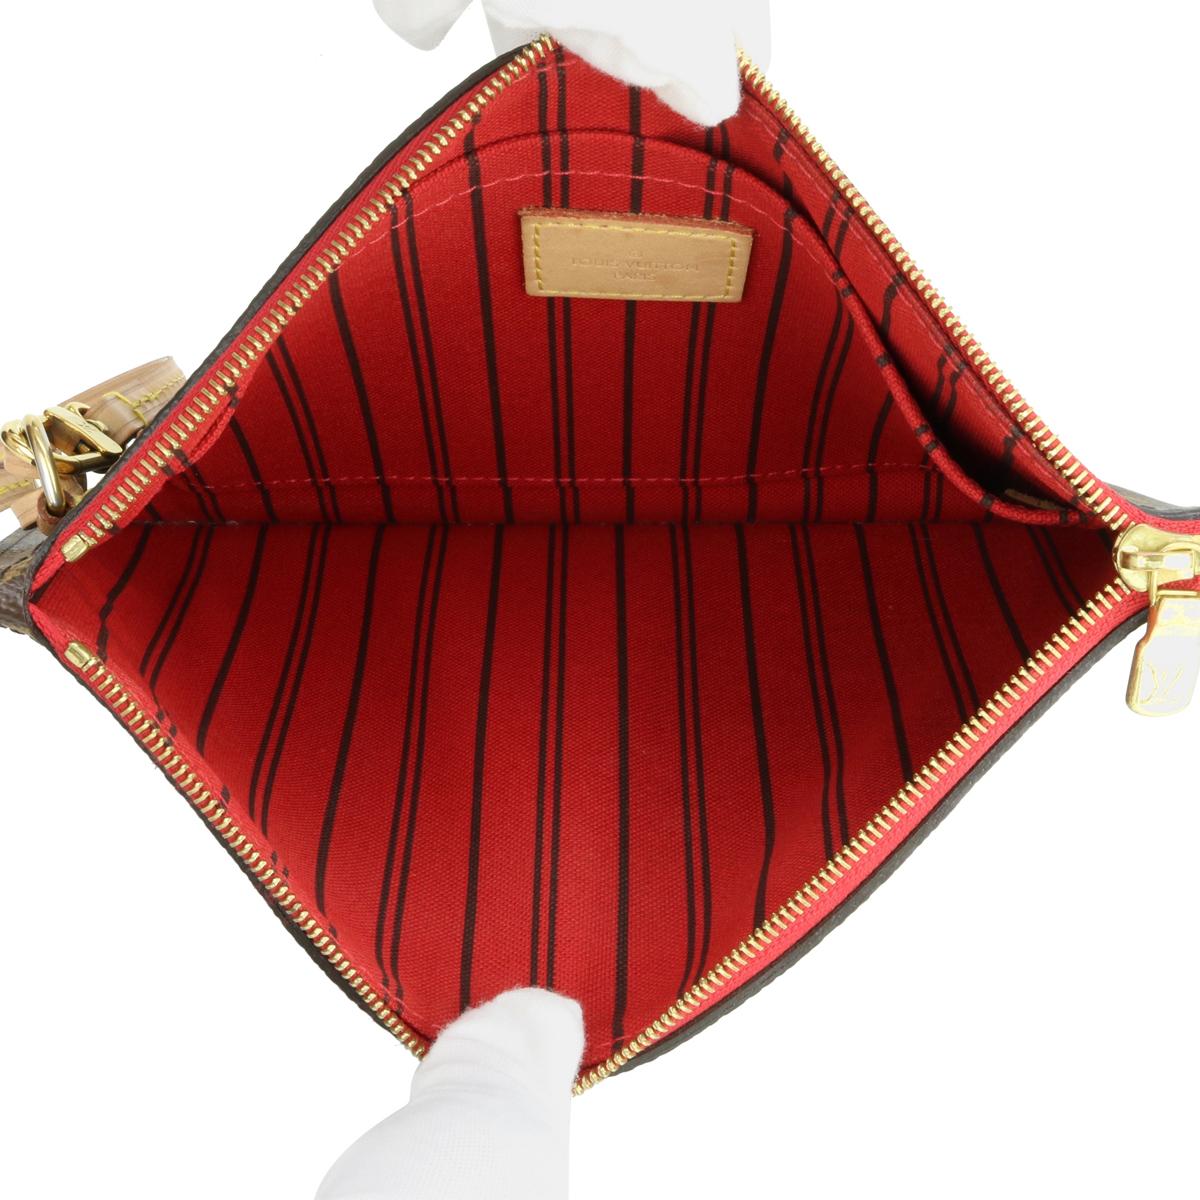 Louis Vuitton Neverfull MM Pochette Pouch in Monogram with Red Interior 2020 9